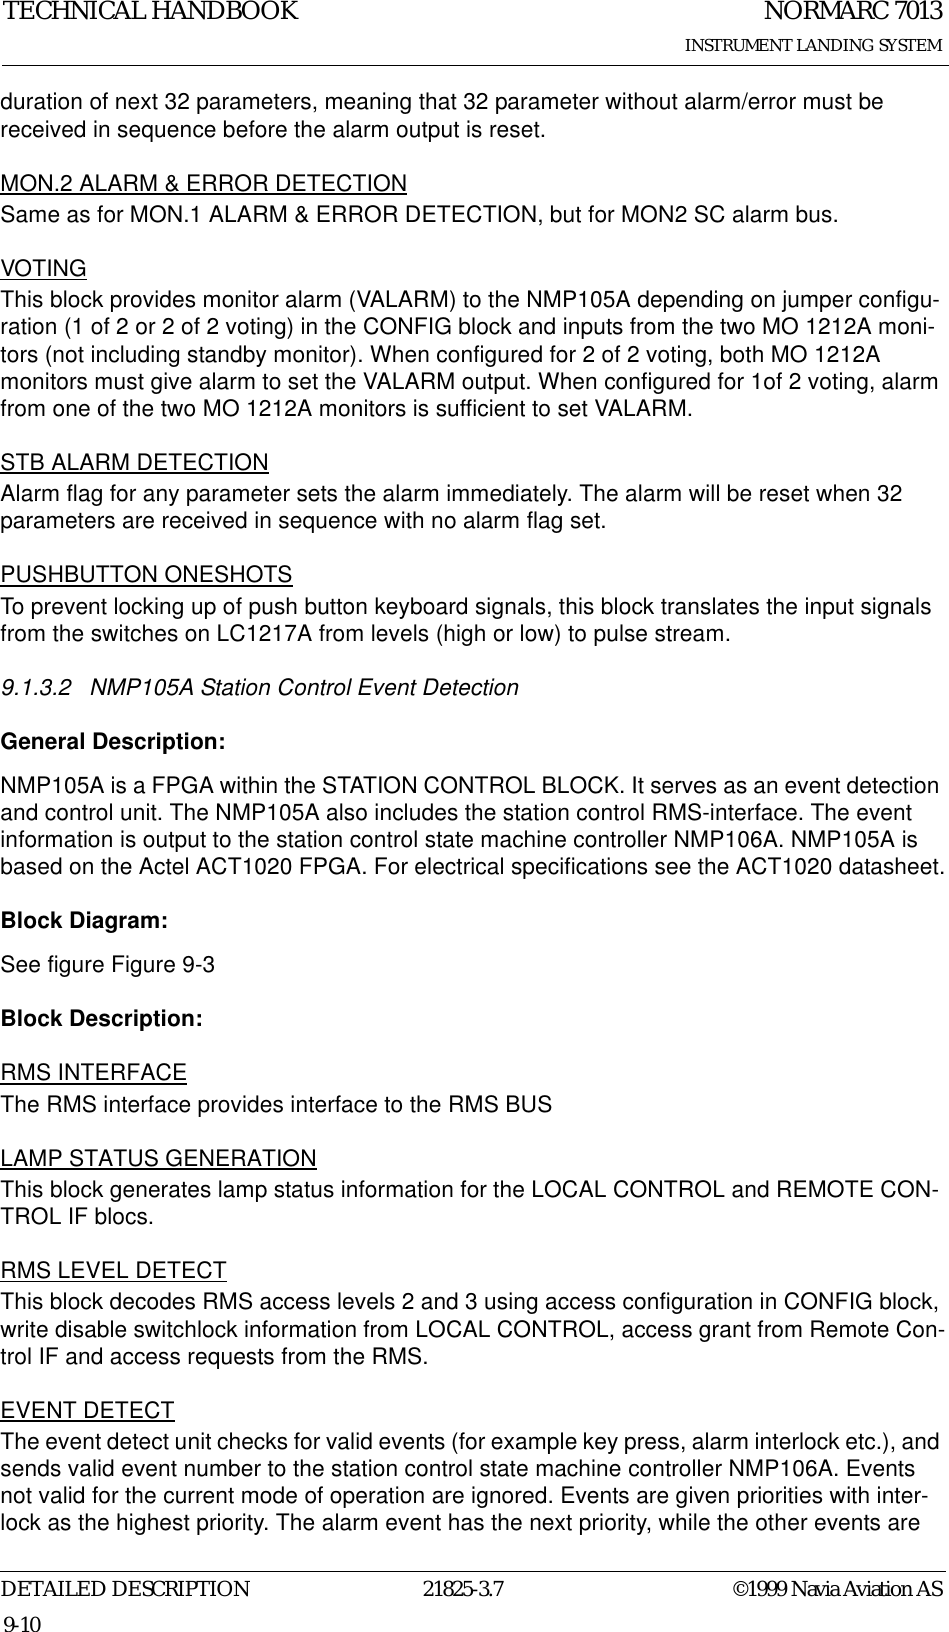 NORMARC 7013INSTRUMENT LANDING SYSTEMTECHNICAL HANDBOOKDETAILED DESCRIPTION 21825-3.7 ©1999 Navia Aviation AS9-10duration of next 32 parameters, meaning that 32 parameter without alarm/error must be received in sequence before the alarm output is reset.MON.2 ALARM &amp; ERROR DETECTIONSame as for MON.1 ALARM &amp; ERROR DETECTION, but for MON2 SC alarm bus.VOTINGThis block provides monitor alarm (VALARM) to the NMP105A depending on jumper configu-ration (1 of 2 or 2 of 2 voting) in the CONFIG block and inputs from the two MO 1212A moni-tors (not including standby monitor). When configured for 2 of 2 voting, both MO 1212A monitors must give alarm to set the VALARM output. When configured for 1of 2 voting, alarm from one of the two MO 1212A monitors is sufficient to set VALARM.STB ALARM DETECTIONAlarm flag for any parameter sets the alarm immediately. The alarm will be reset when 32 parameters are received in sequence with no alarm flag set.PUSHBUTTON ONESHOTSTo prevent locking up of push button keyboard signals, this block translates the input signals from the switches on LC1217A from levels (high or low) to pulse stream.9.1.3.2 NMP105A Station Control Event DetectionGeneral Description:NMP105A is a FPGA within the STATION CONTROL BLOCK. It serves as an event detection and control unit. The NMP105A also includes the station control RMS-interface. The event information is output to the station control state machine controller NMP106A. NMP105A is based on the Actel ACT1020 FPGA. For electrical specifications see the ACT1020 datasheet.Block Diagram:See figure Figure 9-3 Block Description:RMS INTERFACEThe RMS interface provides interface to the RMS BUSLAMP STATUS GENERATIONThis block generates lamp status information for the LOCAL CONTROL and REMOTE CON-TROL IF blocs.RMS LEVEL DETECTThis block decodes RMS access levels 2 and 3 using access configuration in CONFIG block, write disable switchlock information from LOCAL CONTROL, access grant from Remote Con-trol IF and access requests from the RMS.EVENT DETECTThe event detect unit checks for valid events (for example key press, alarm interlock etc.), and sends valid event number to the station control state machine controller NMP106A. Events not valid for the current mode of operation are ignored. Events are given priorities with inter-lock as the highest priority. The alarm event has the next priority, while the other events are 